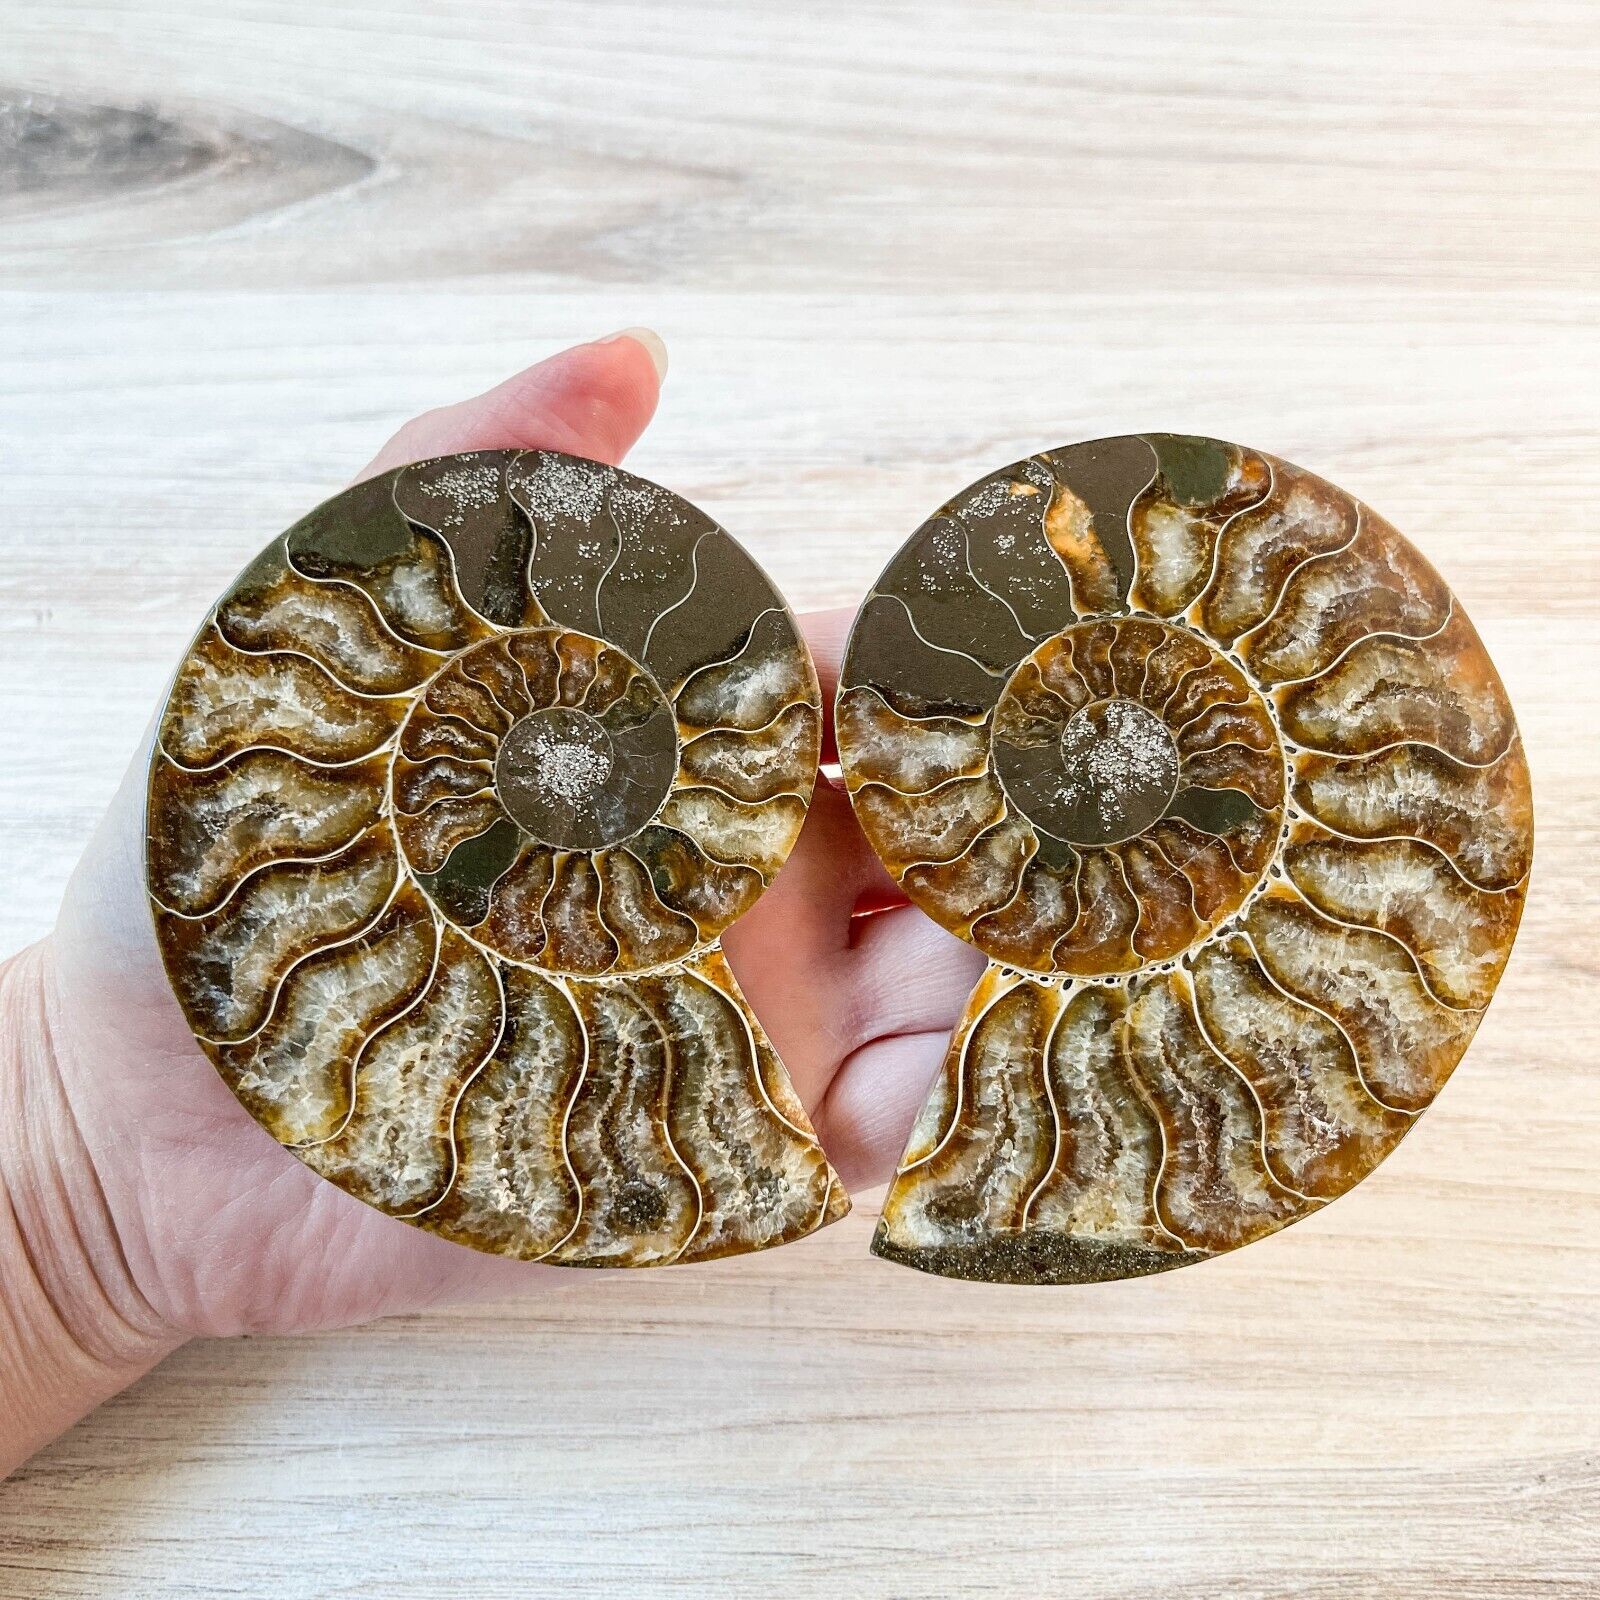 Ammonite Fossil Pair with Calcite Chambers 228g, Polished